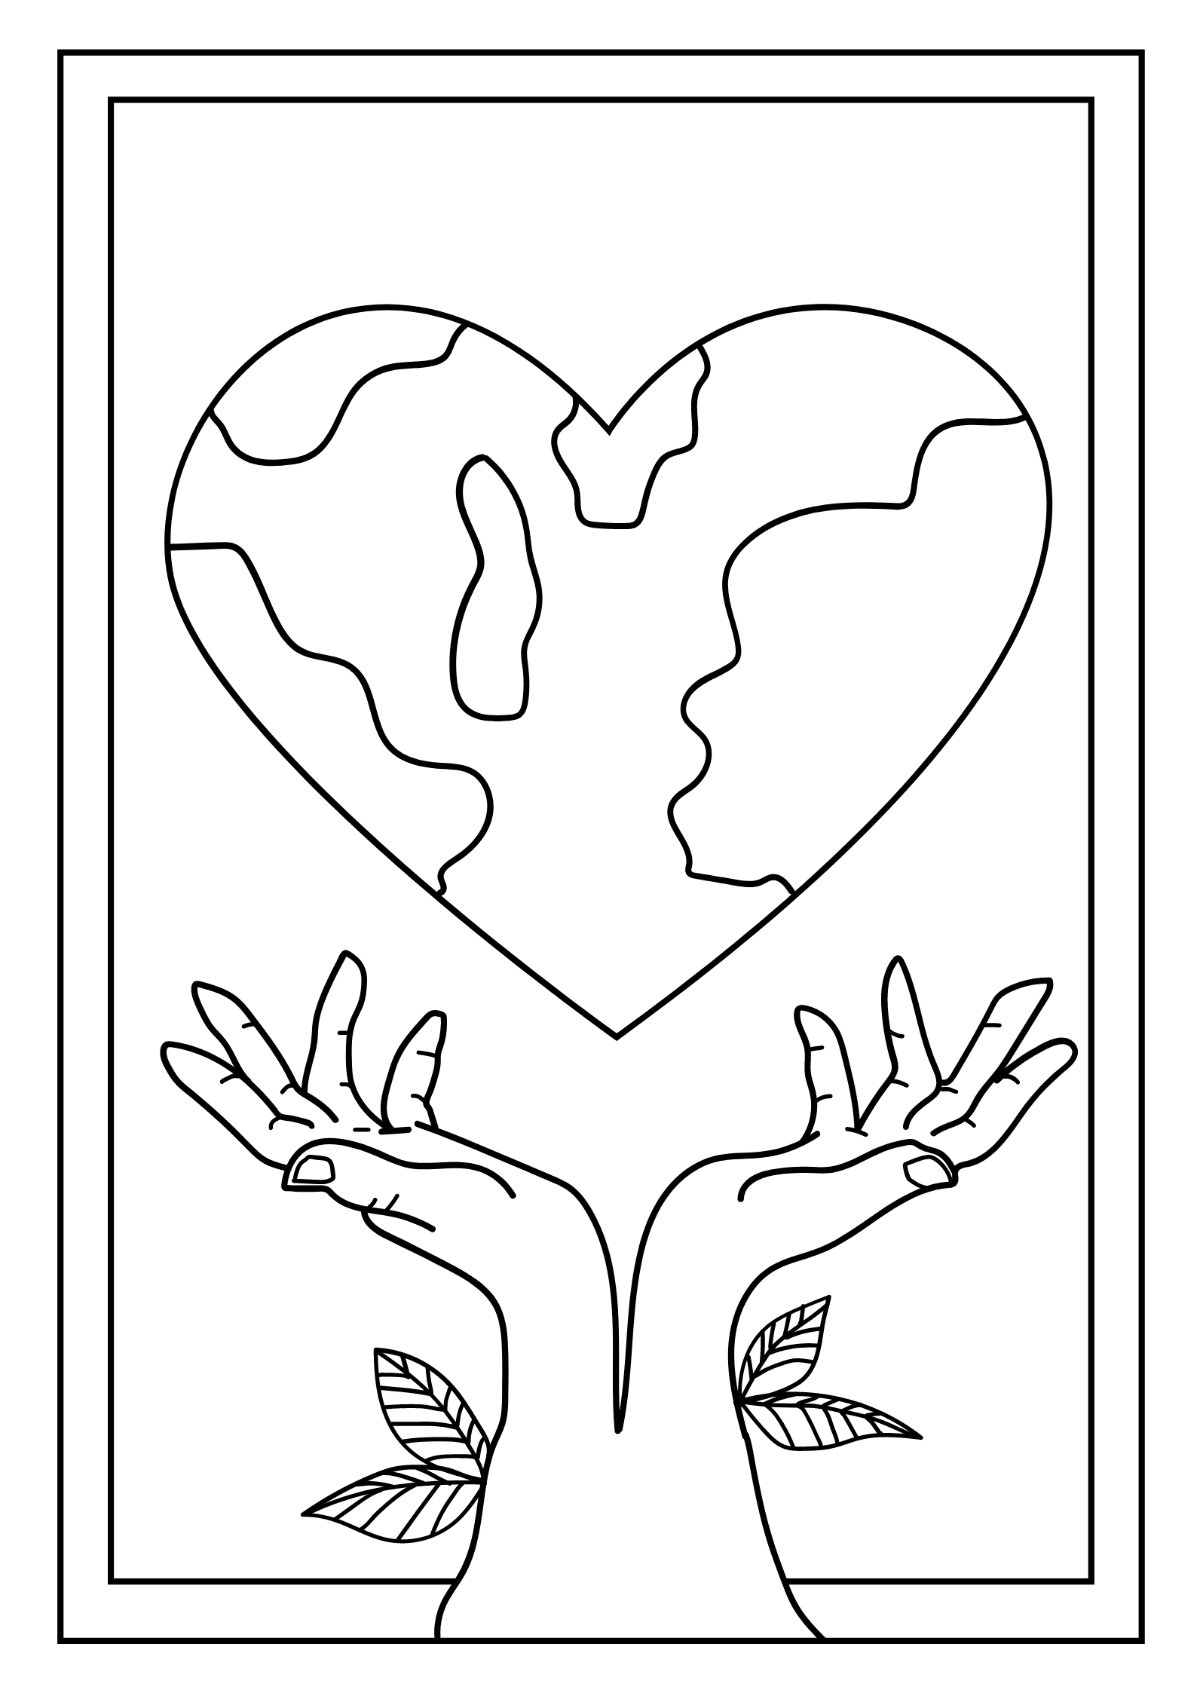 Earth Day Image Drawing Template